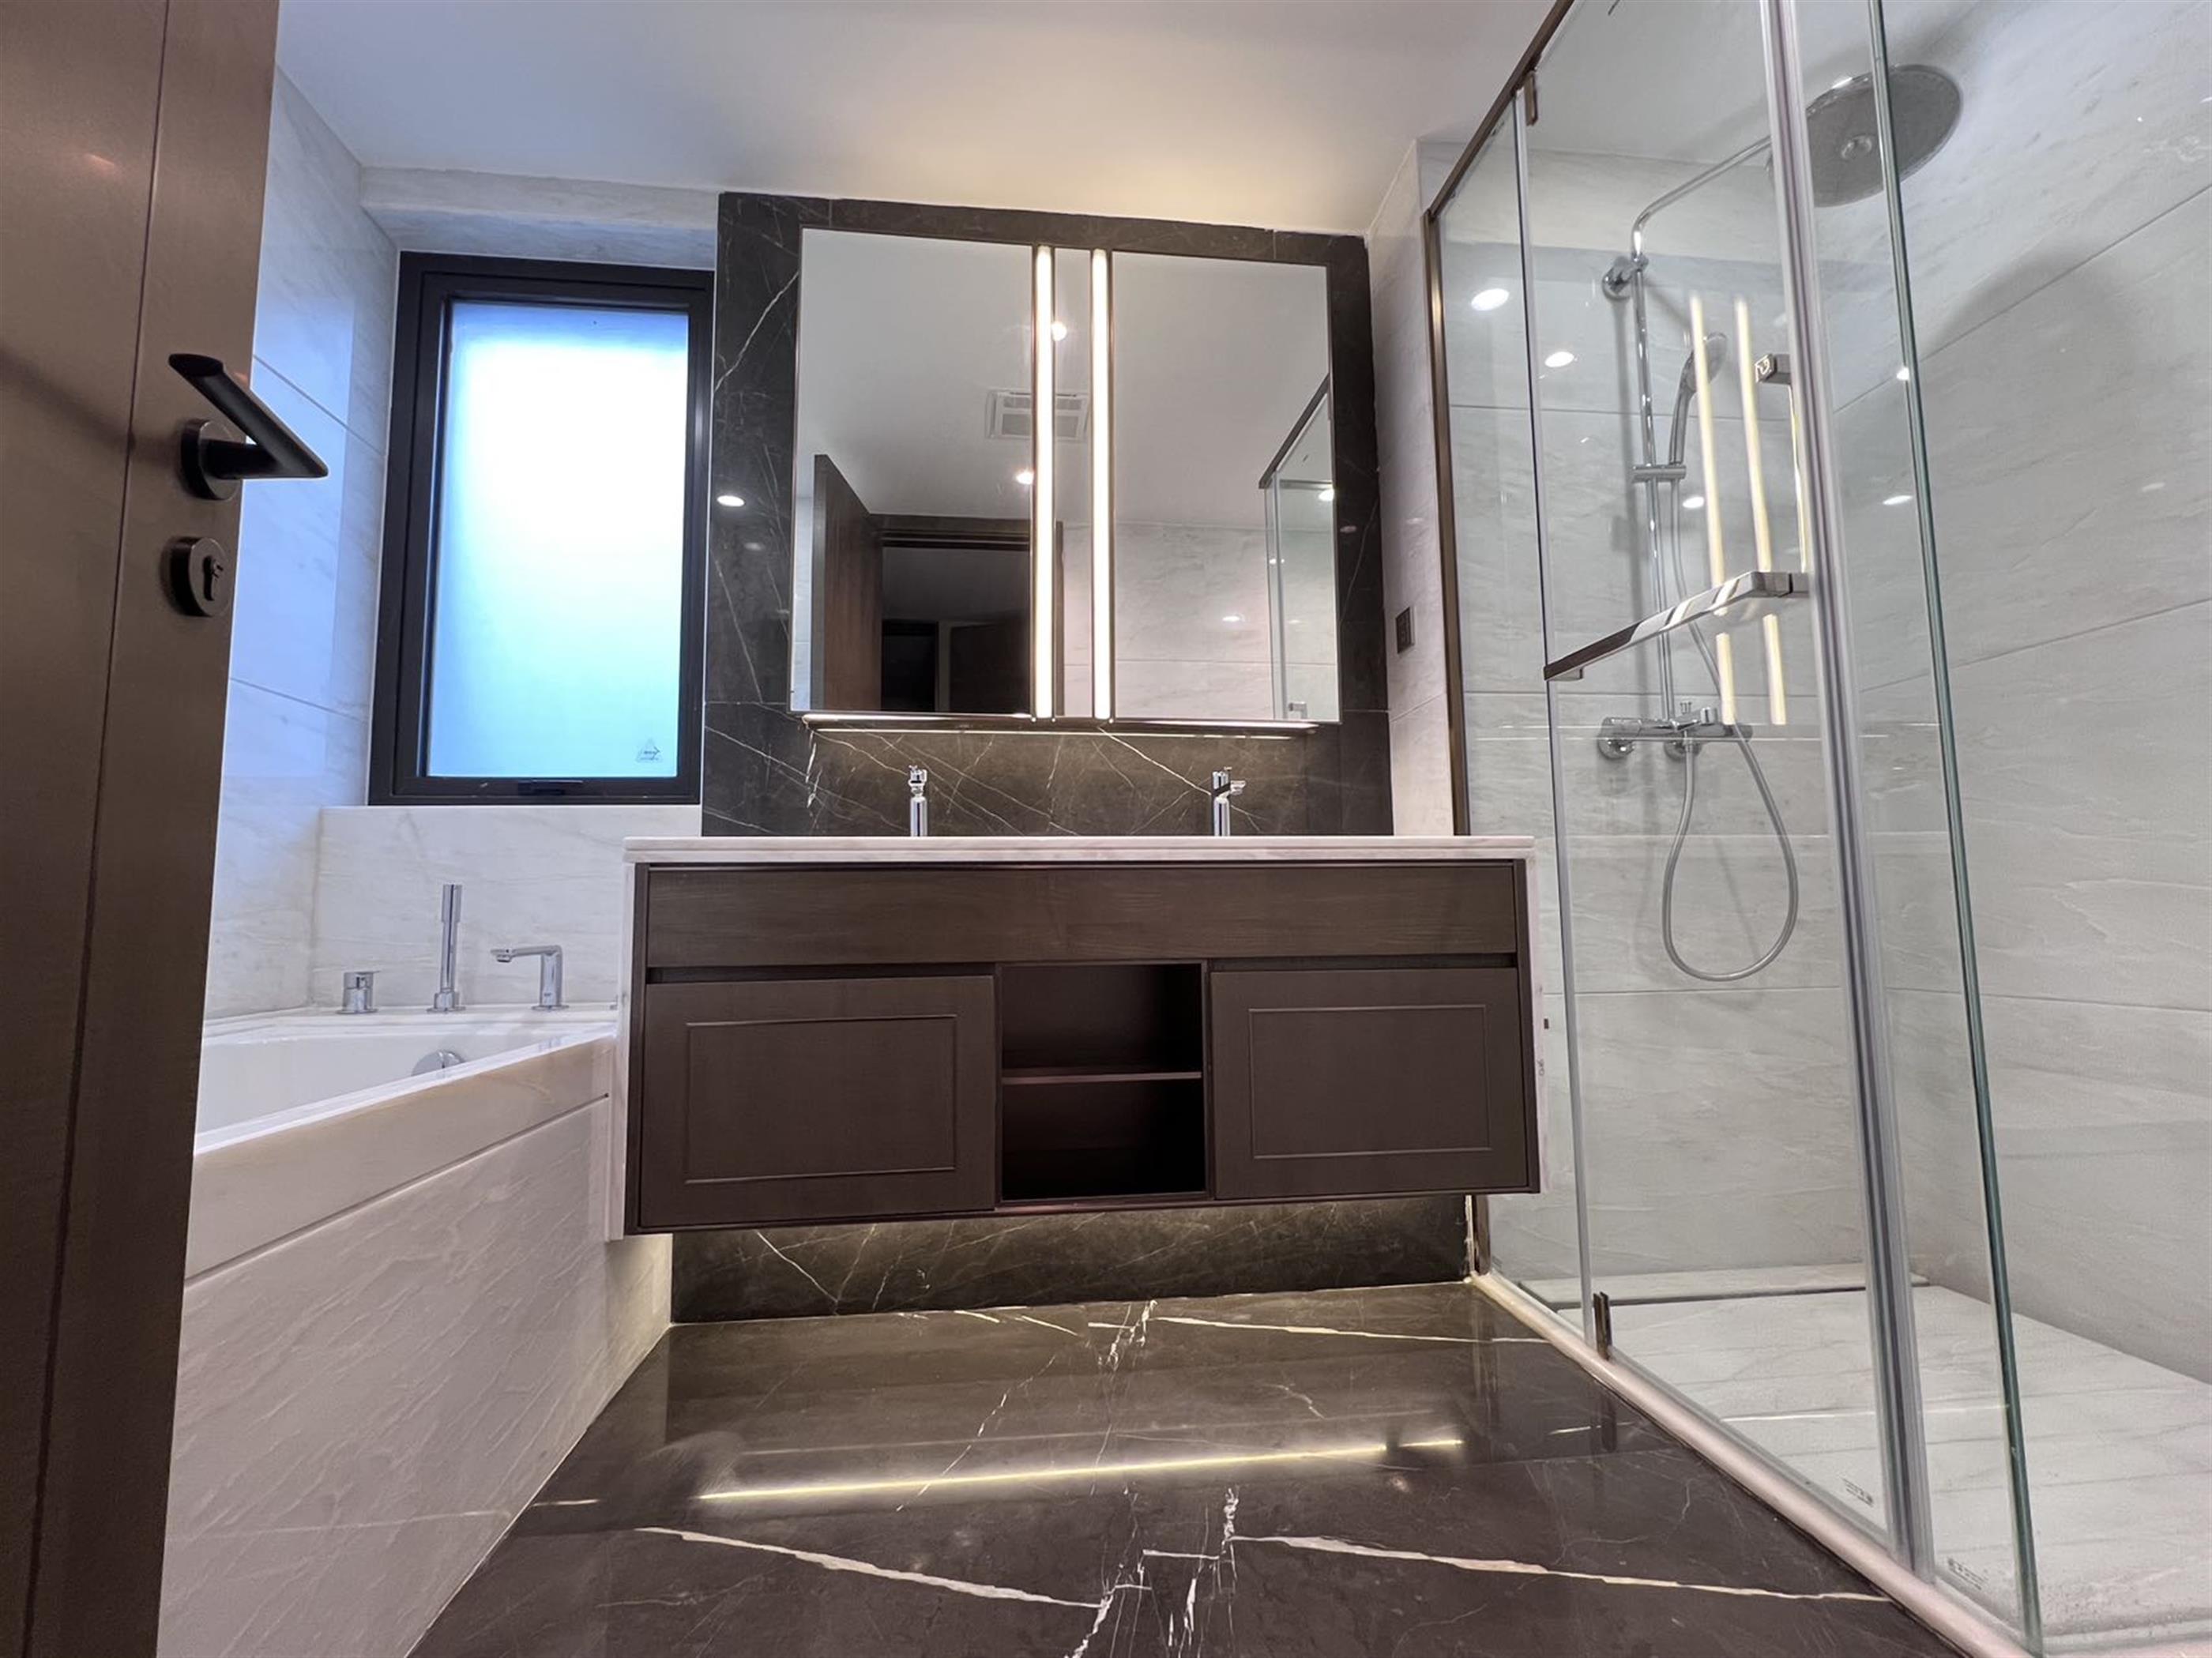 bath tub Brand New Luxurious 4BR Apartment in Chinatown Complex for Rent in Shanghai